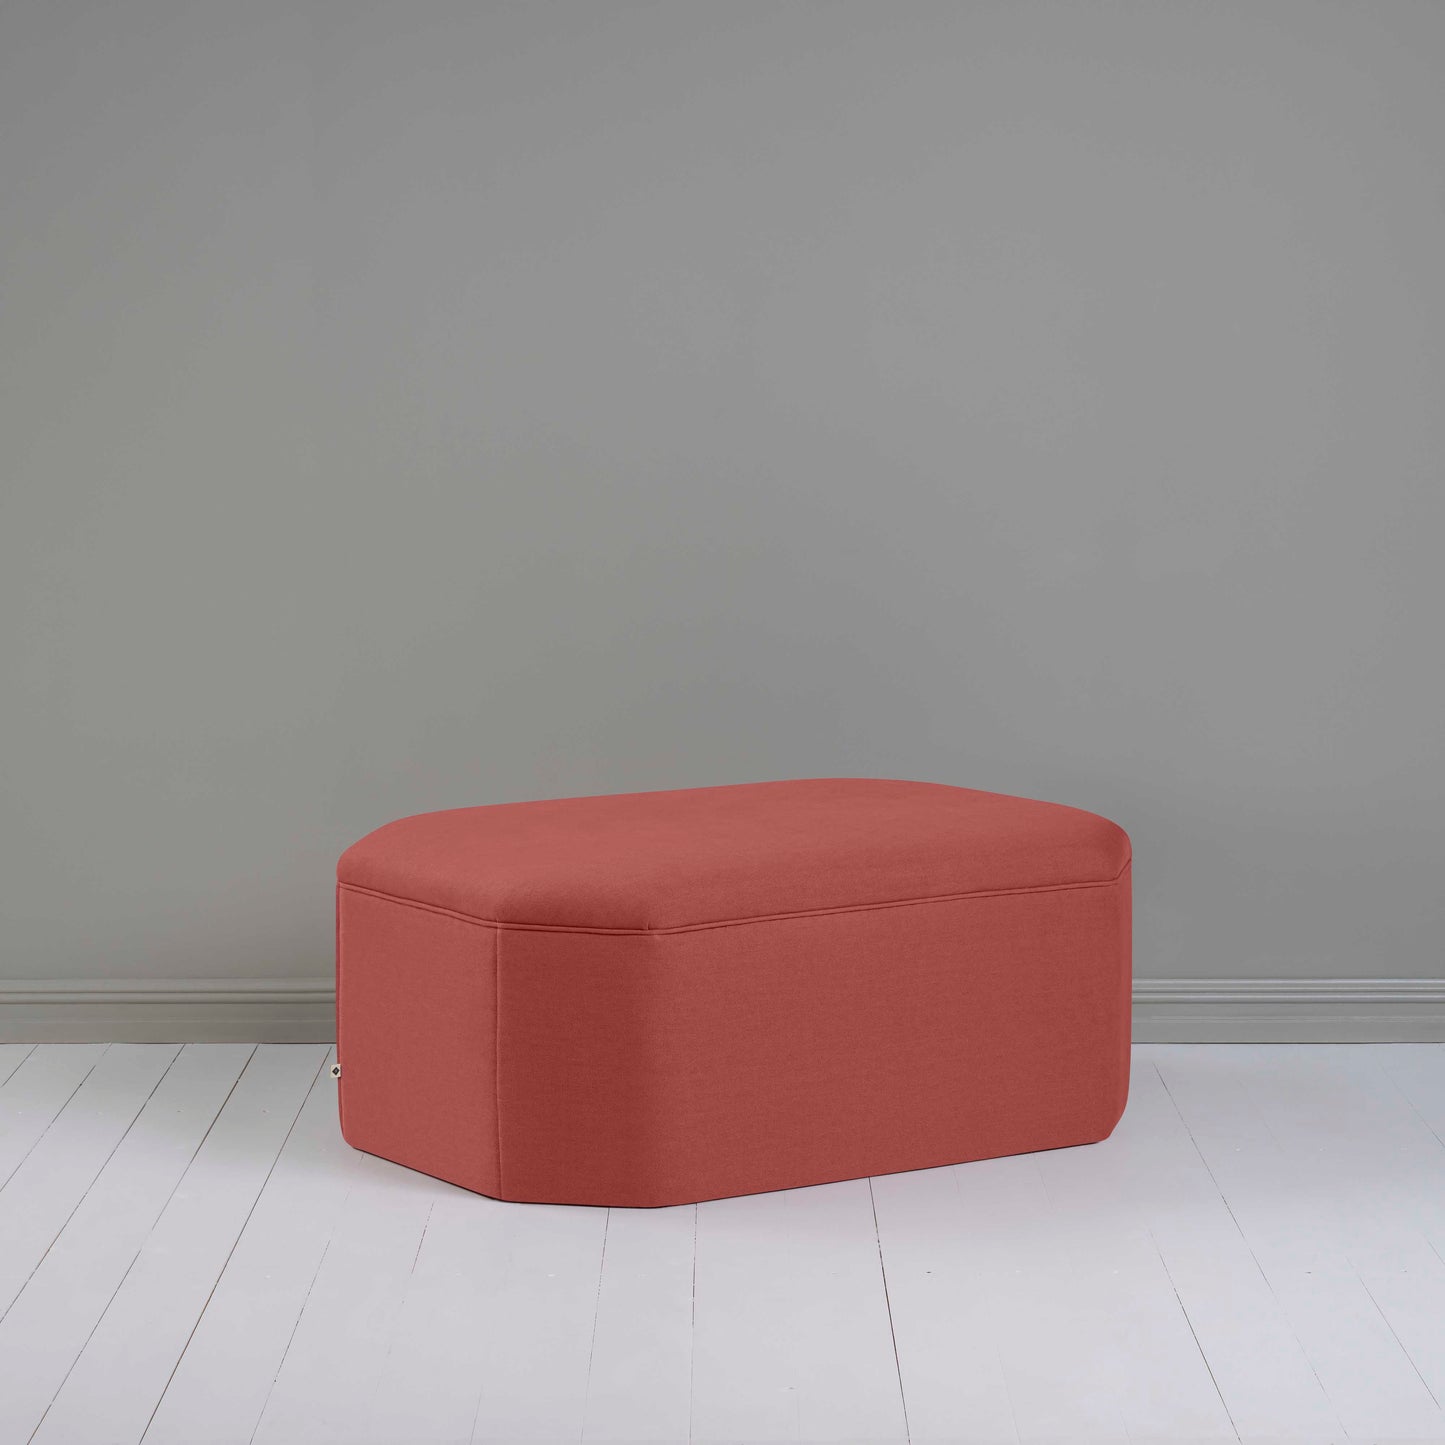 Hither Hexagonal Ottoman in Laidback Linen Rouge